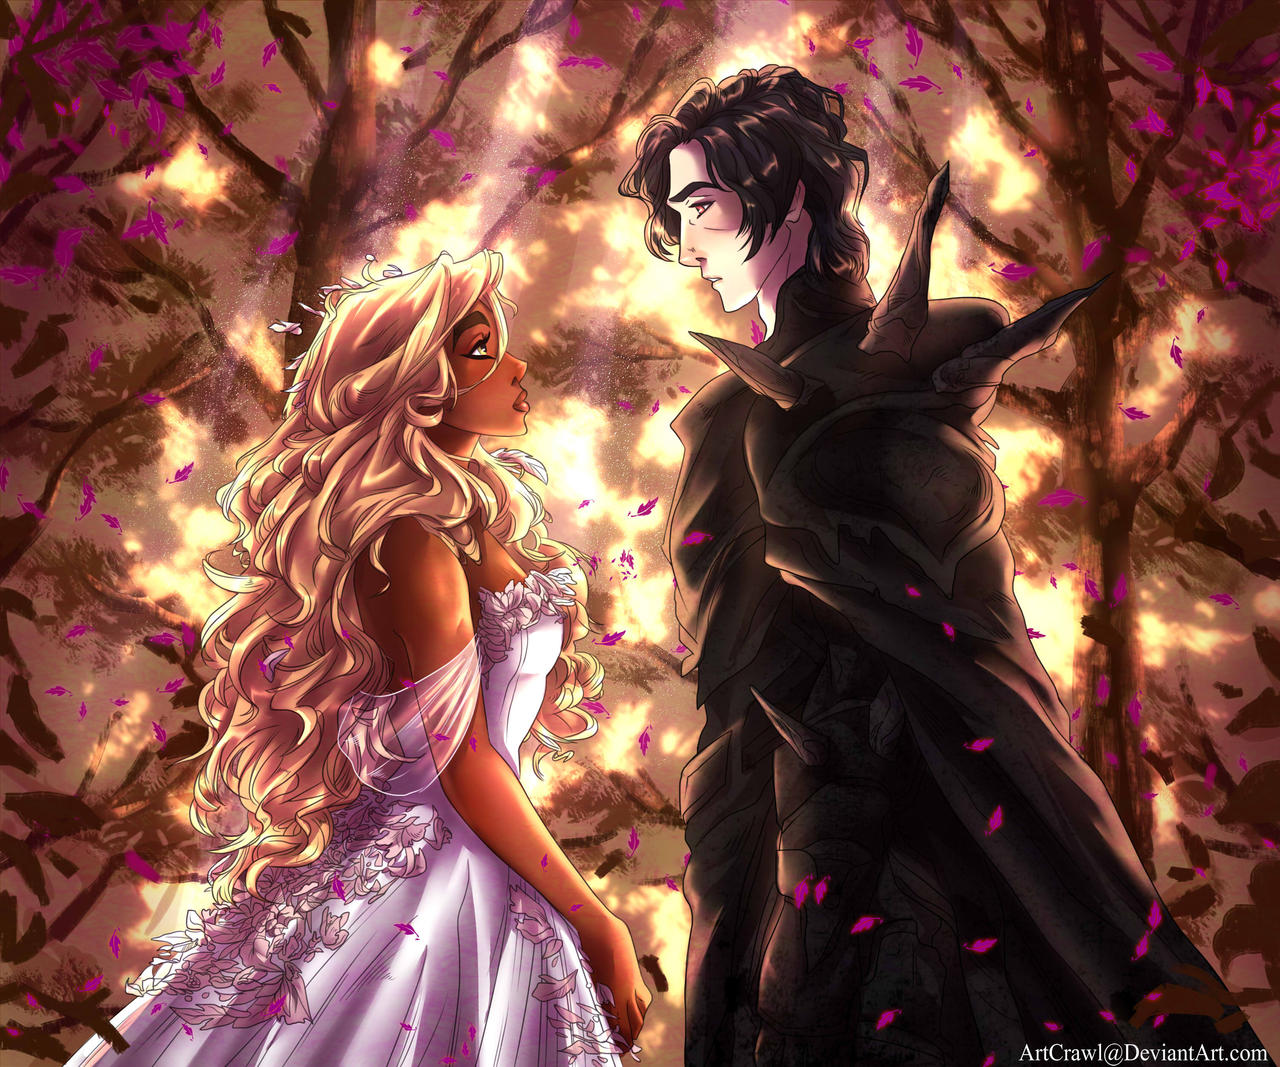 Hades and Persephone. 